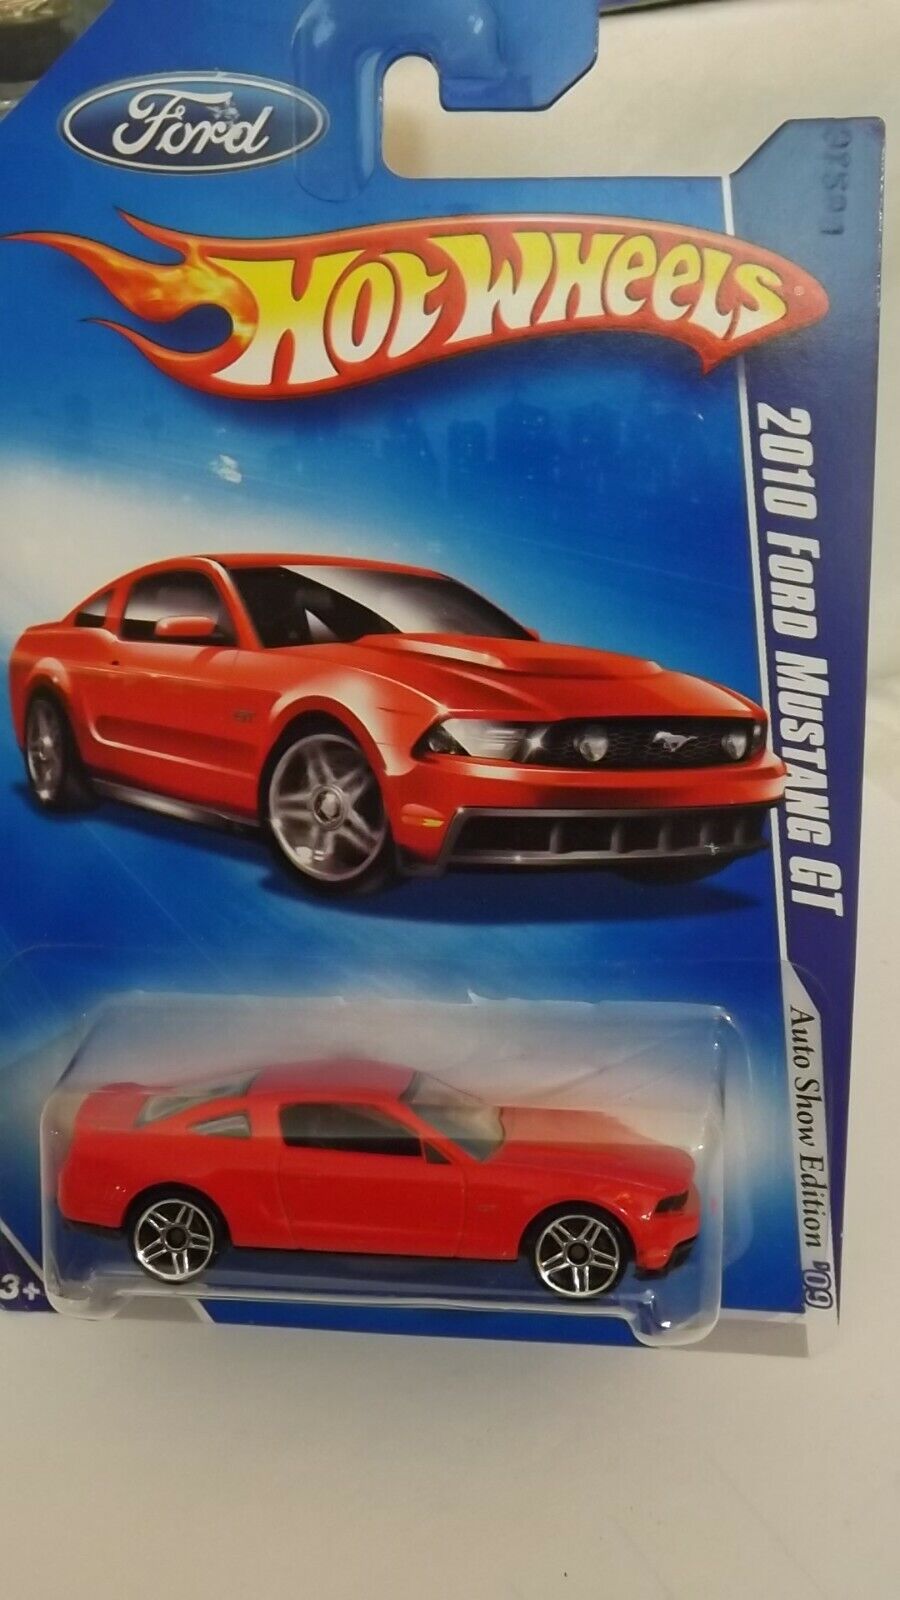 2009 Hotwheels Red 2010 Ford Mustang GT Auto Show Edition '09 1/64 Scale